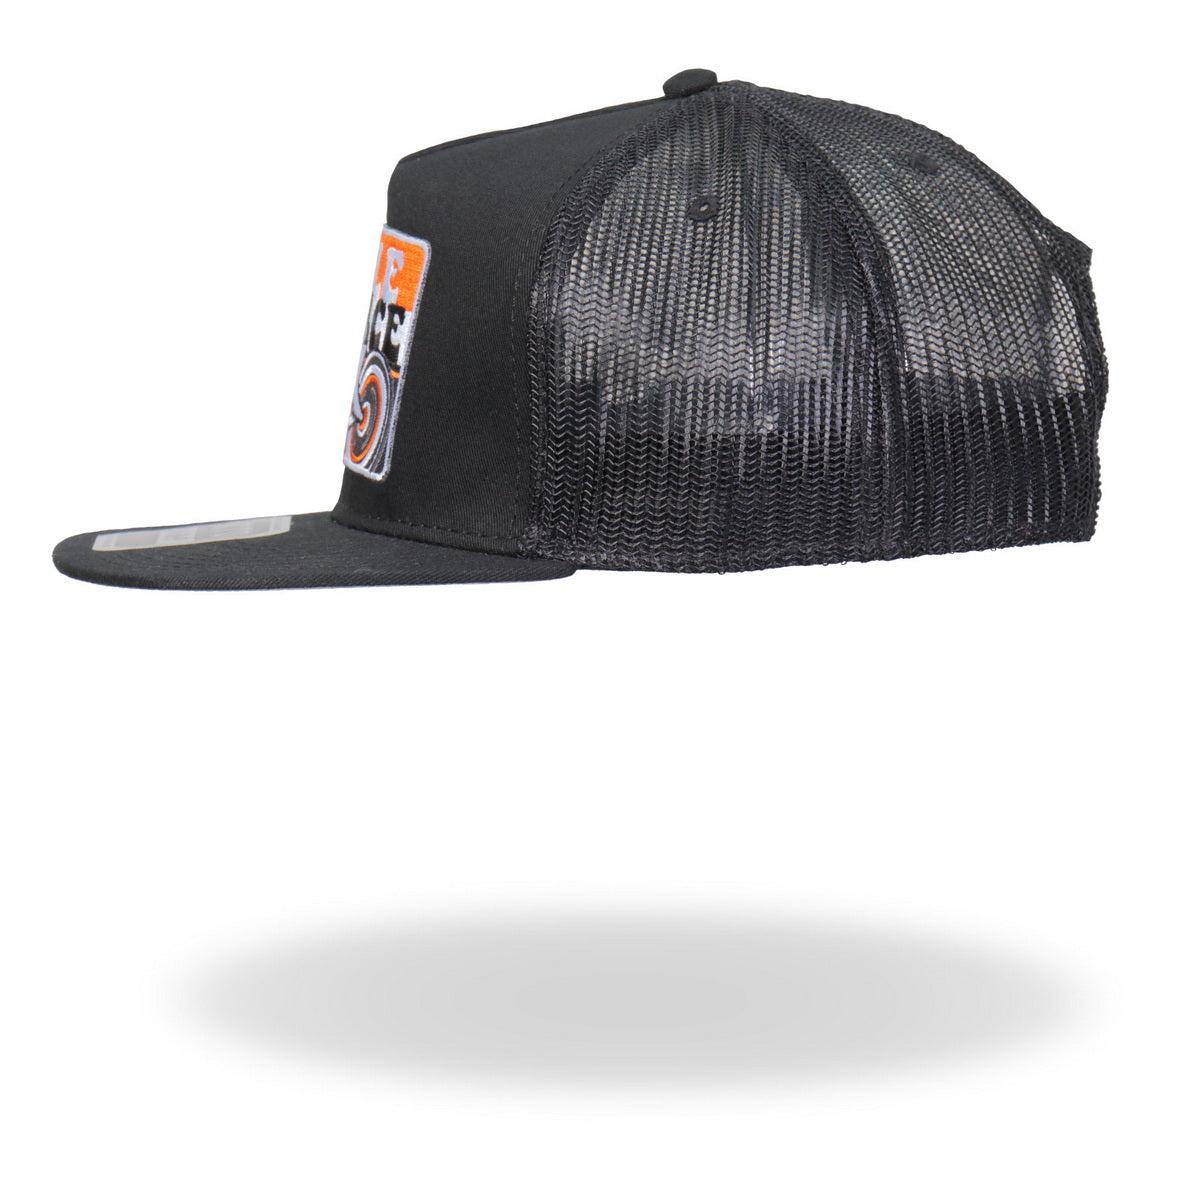 Hot Leathers CYA1004 Official Cycle Source Magazine Stripes Logo Snapback Hat